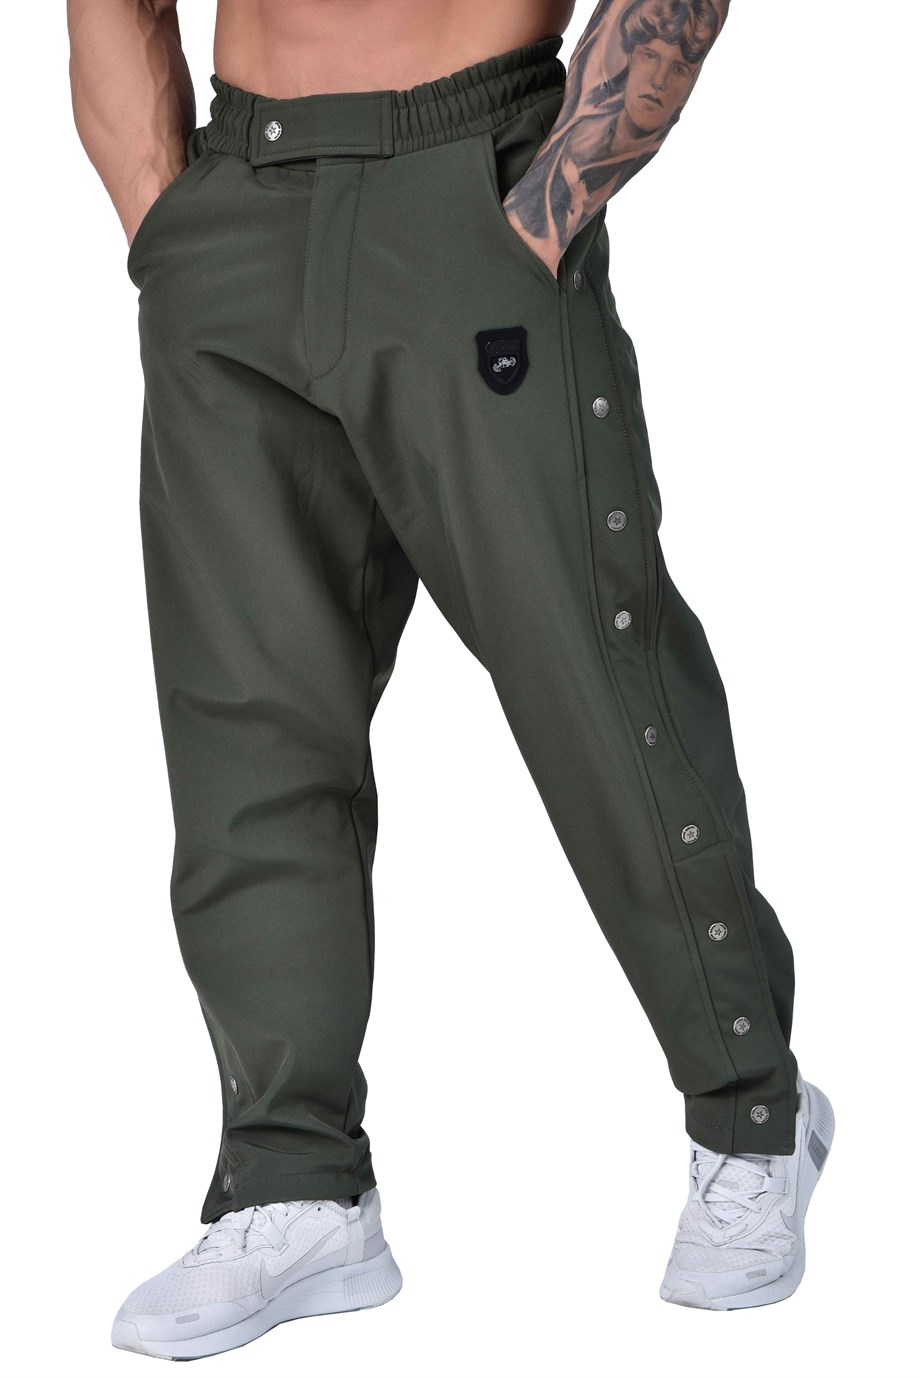 Softshell Workout Military Pants 1217